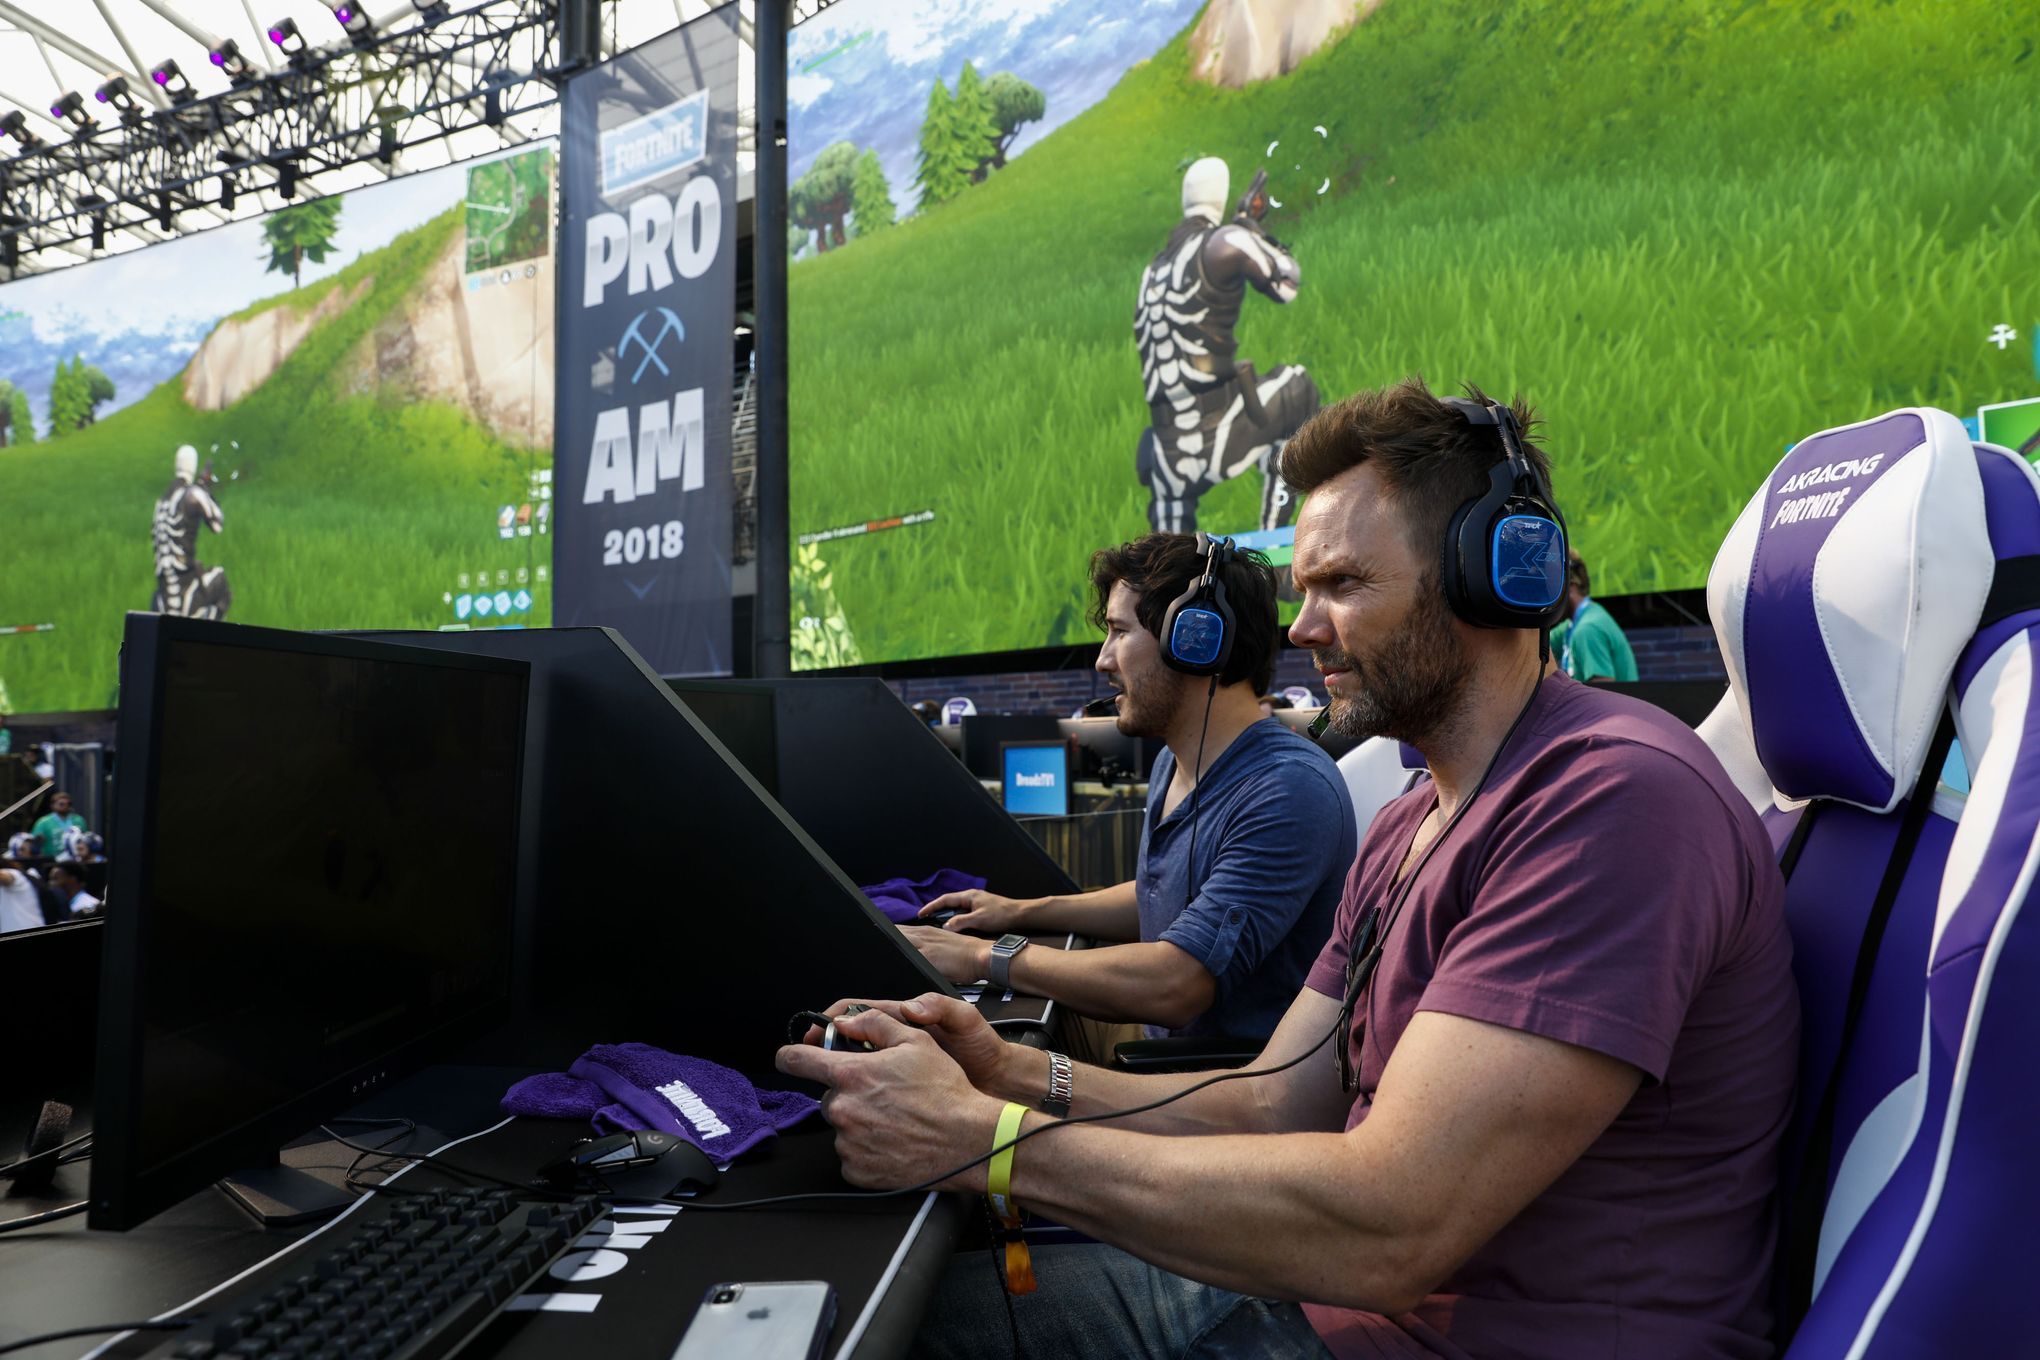 Fortnite, which is free to play, has pulled in more than $1 billion, report  says